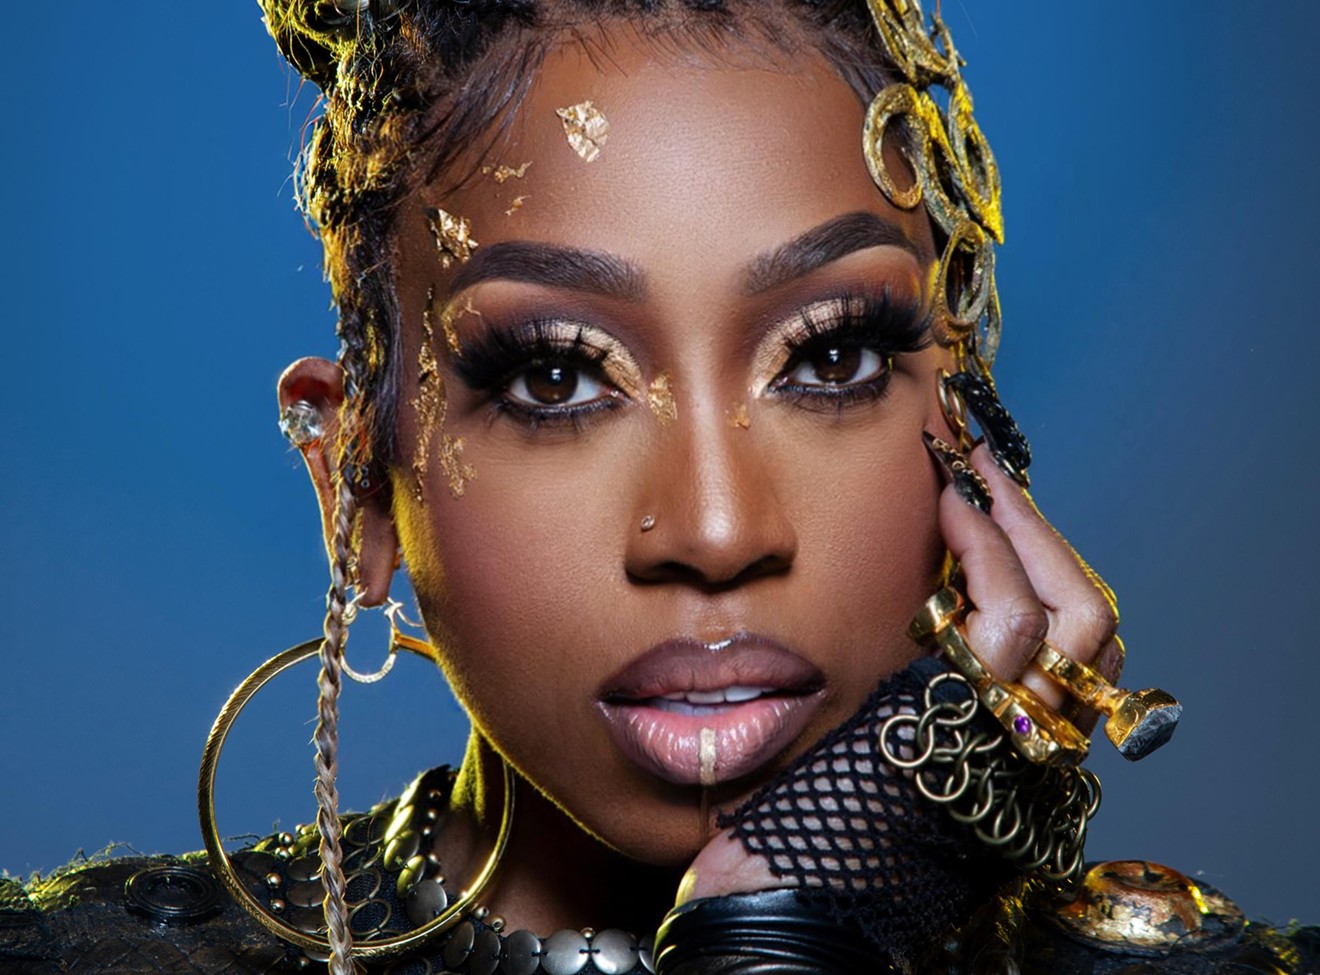 Missy Elliott brings her tour to the Amerant Bank Arena in Sunrise on Thursday, July 25.